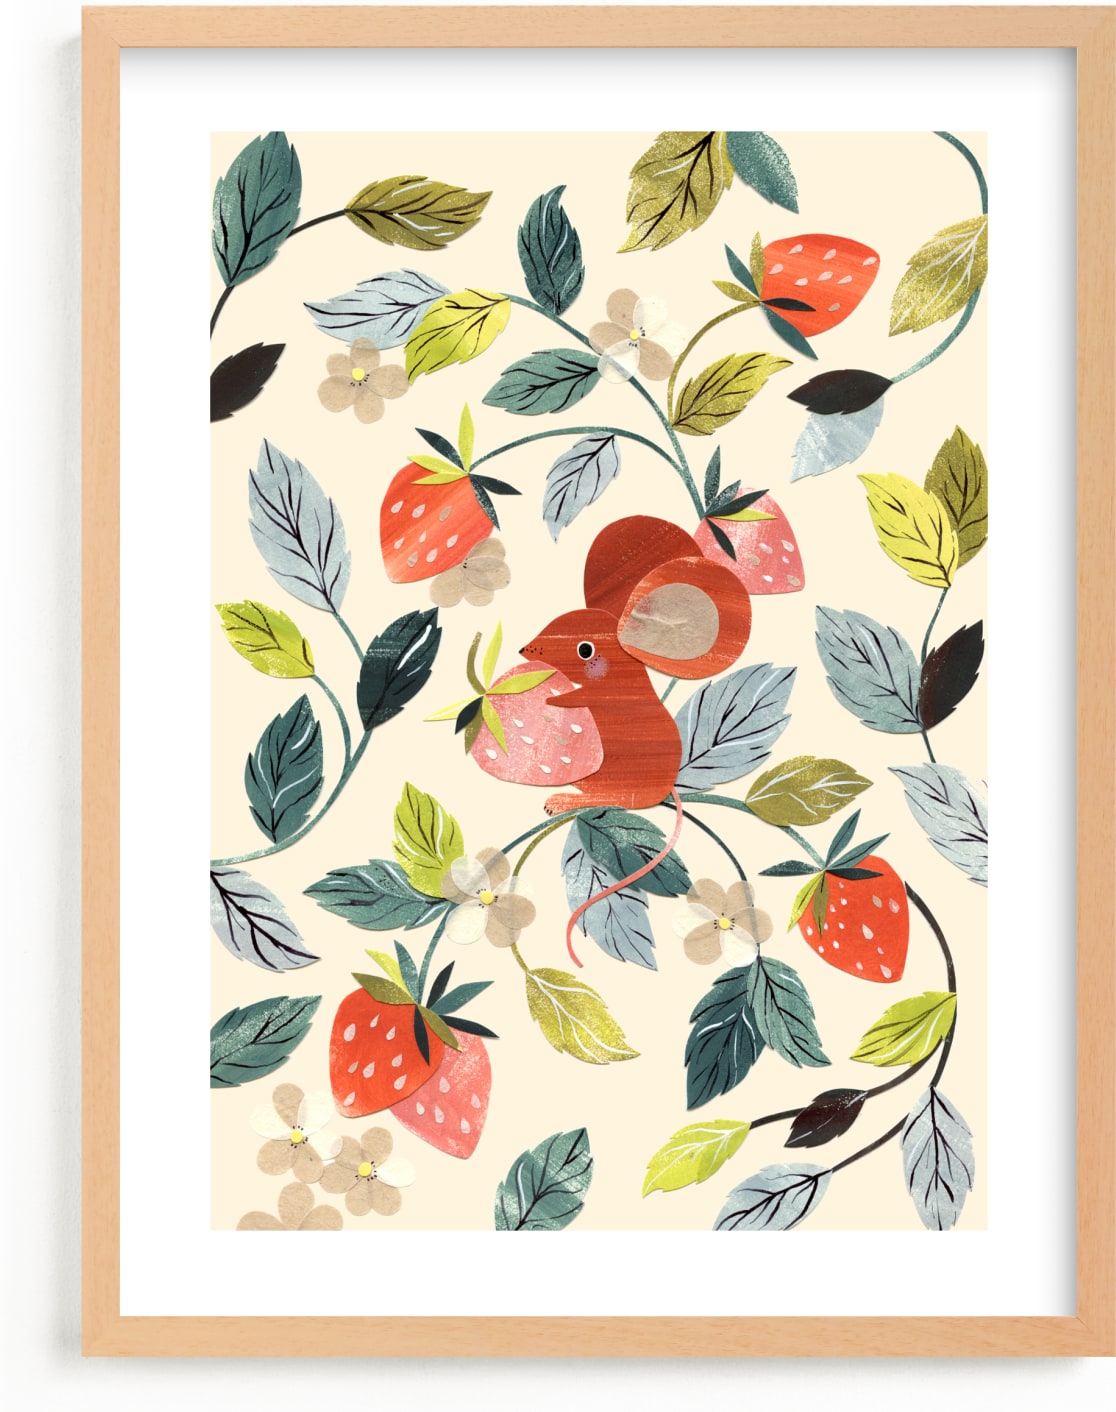 This is a colorful, green, red kids wall art by Sarah Knight called Strawberry Thief.